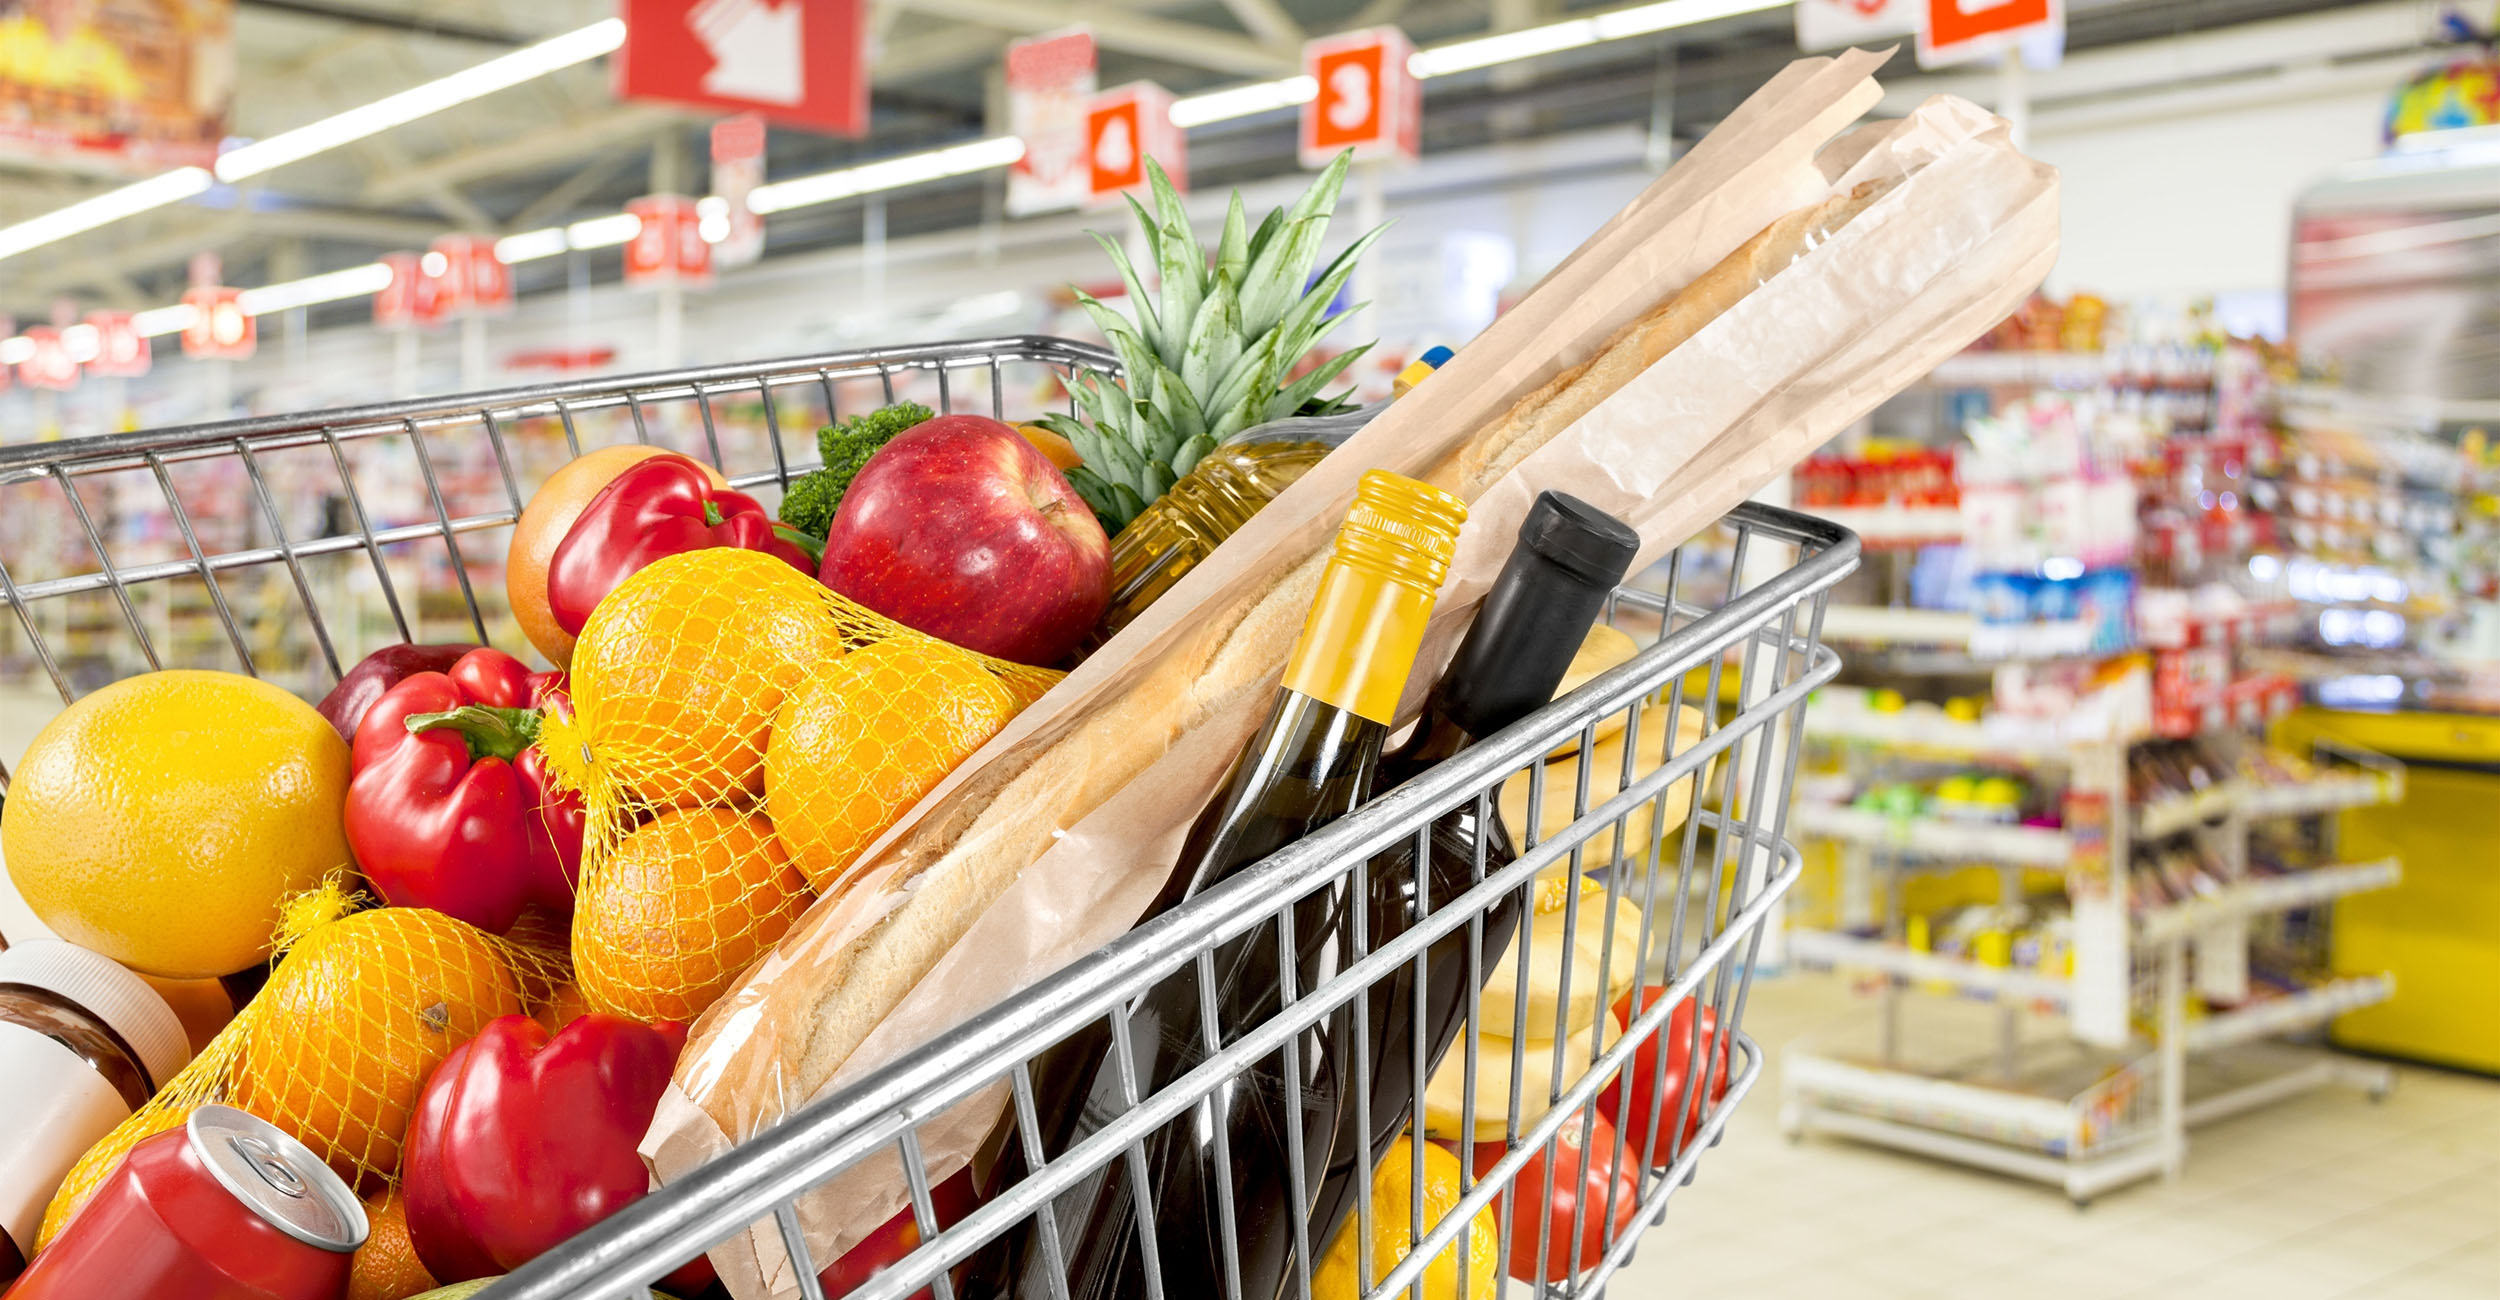 Food safety: the dirty truth about shopping carts